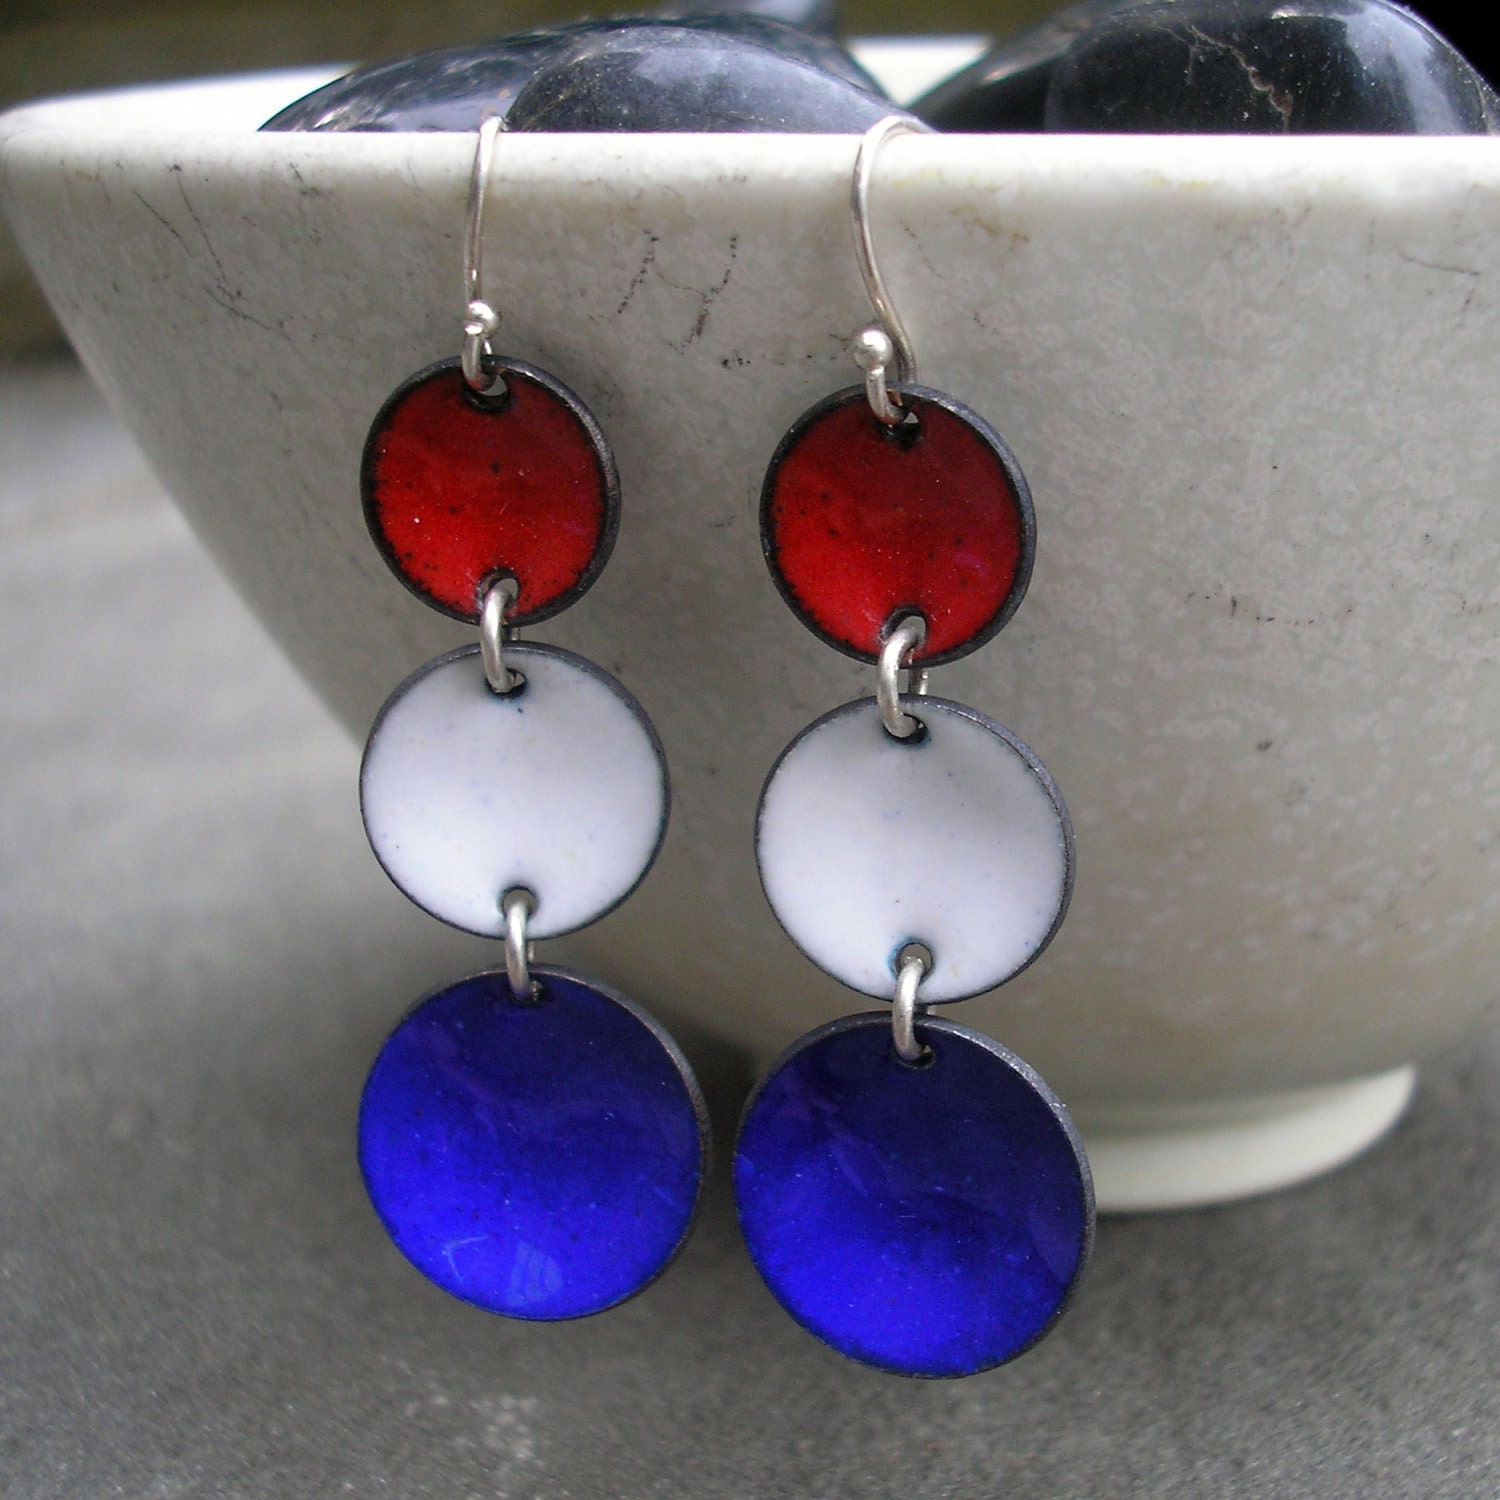 Handmade Red, White, and Blue Enamel and Sterling Silver Dangle Earrings